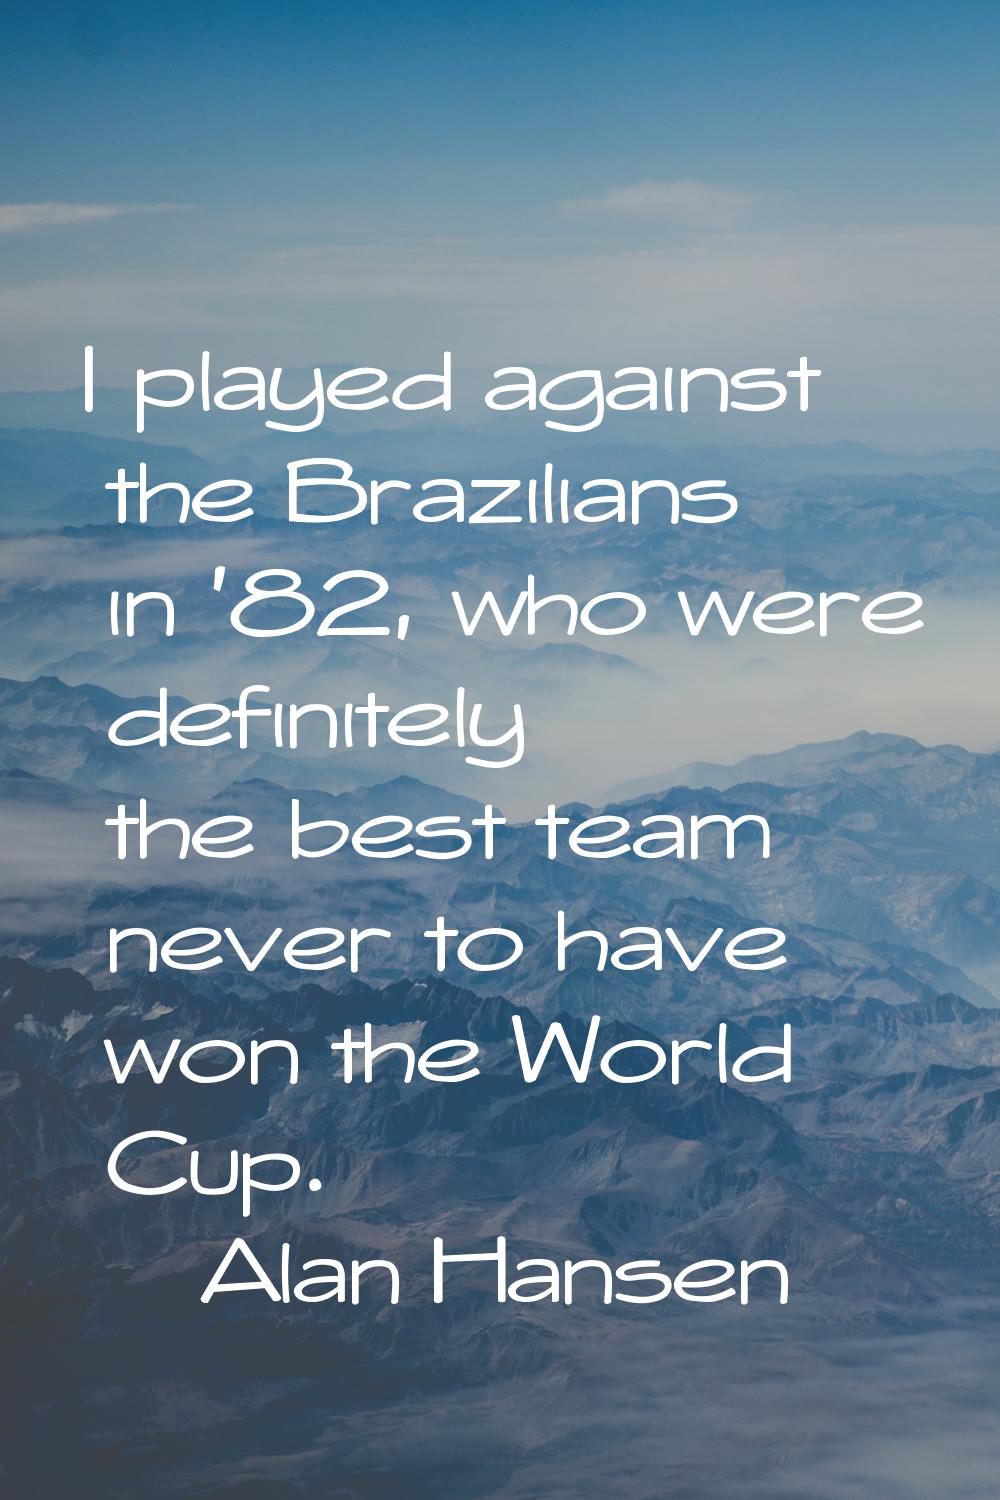 I played against the Brazilians in '82, who were definitely the best team never to have won the Wor